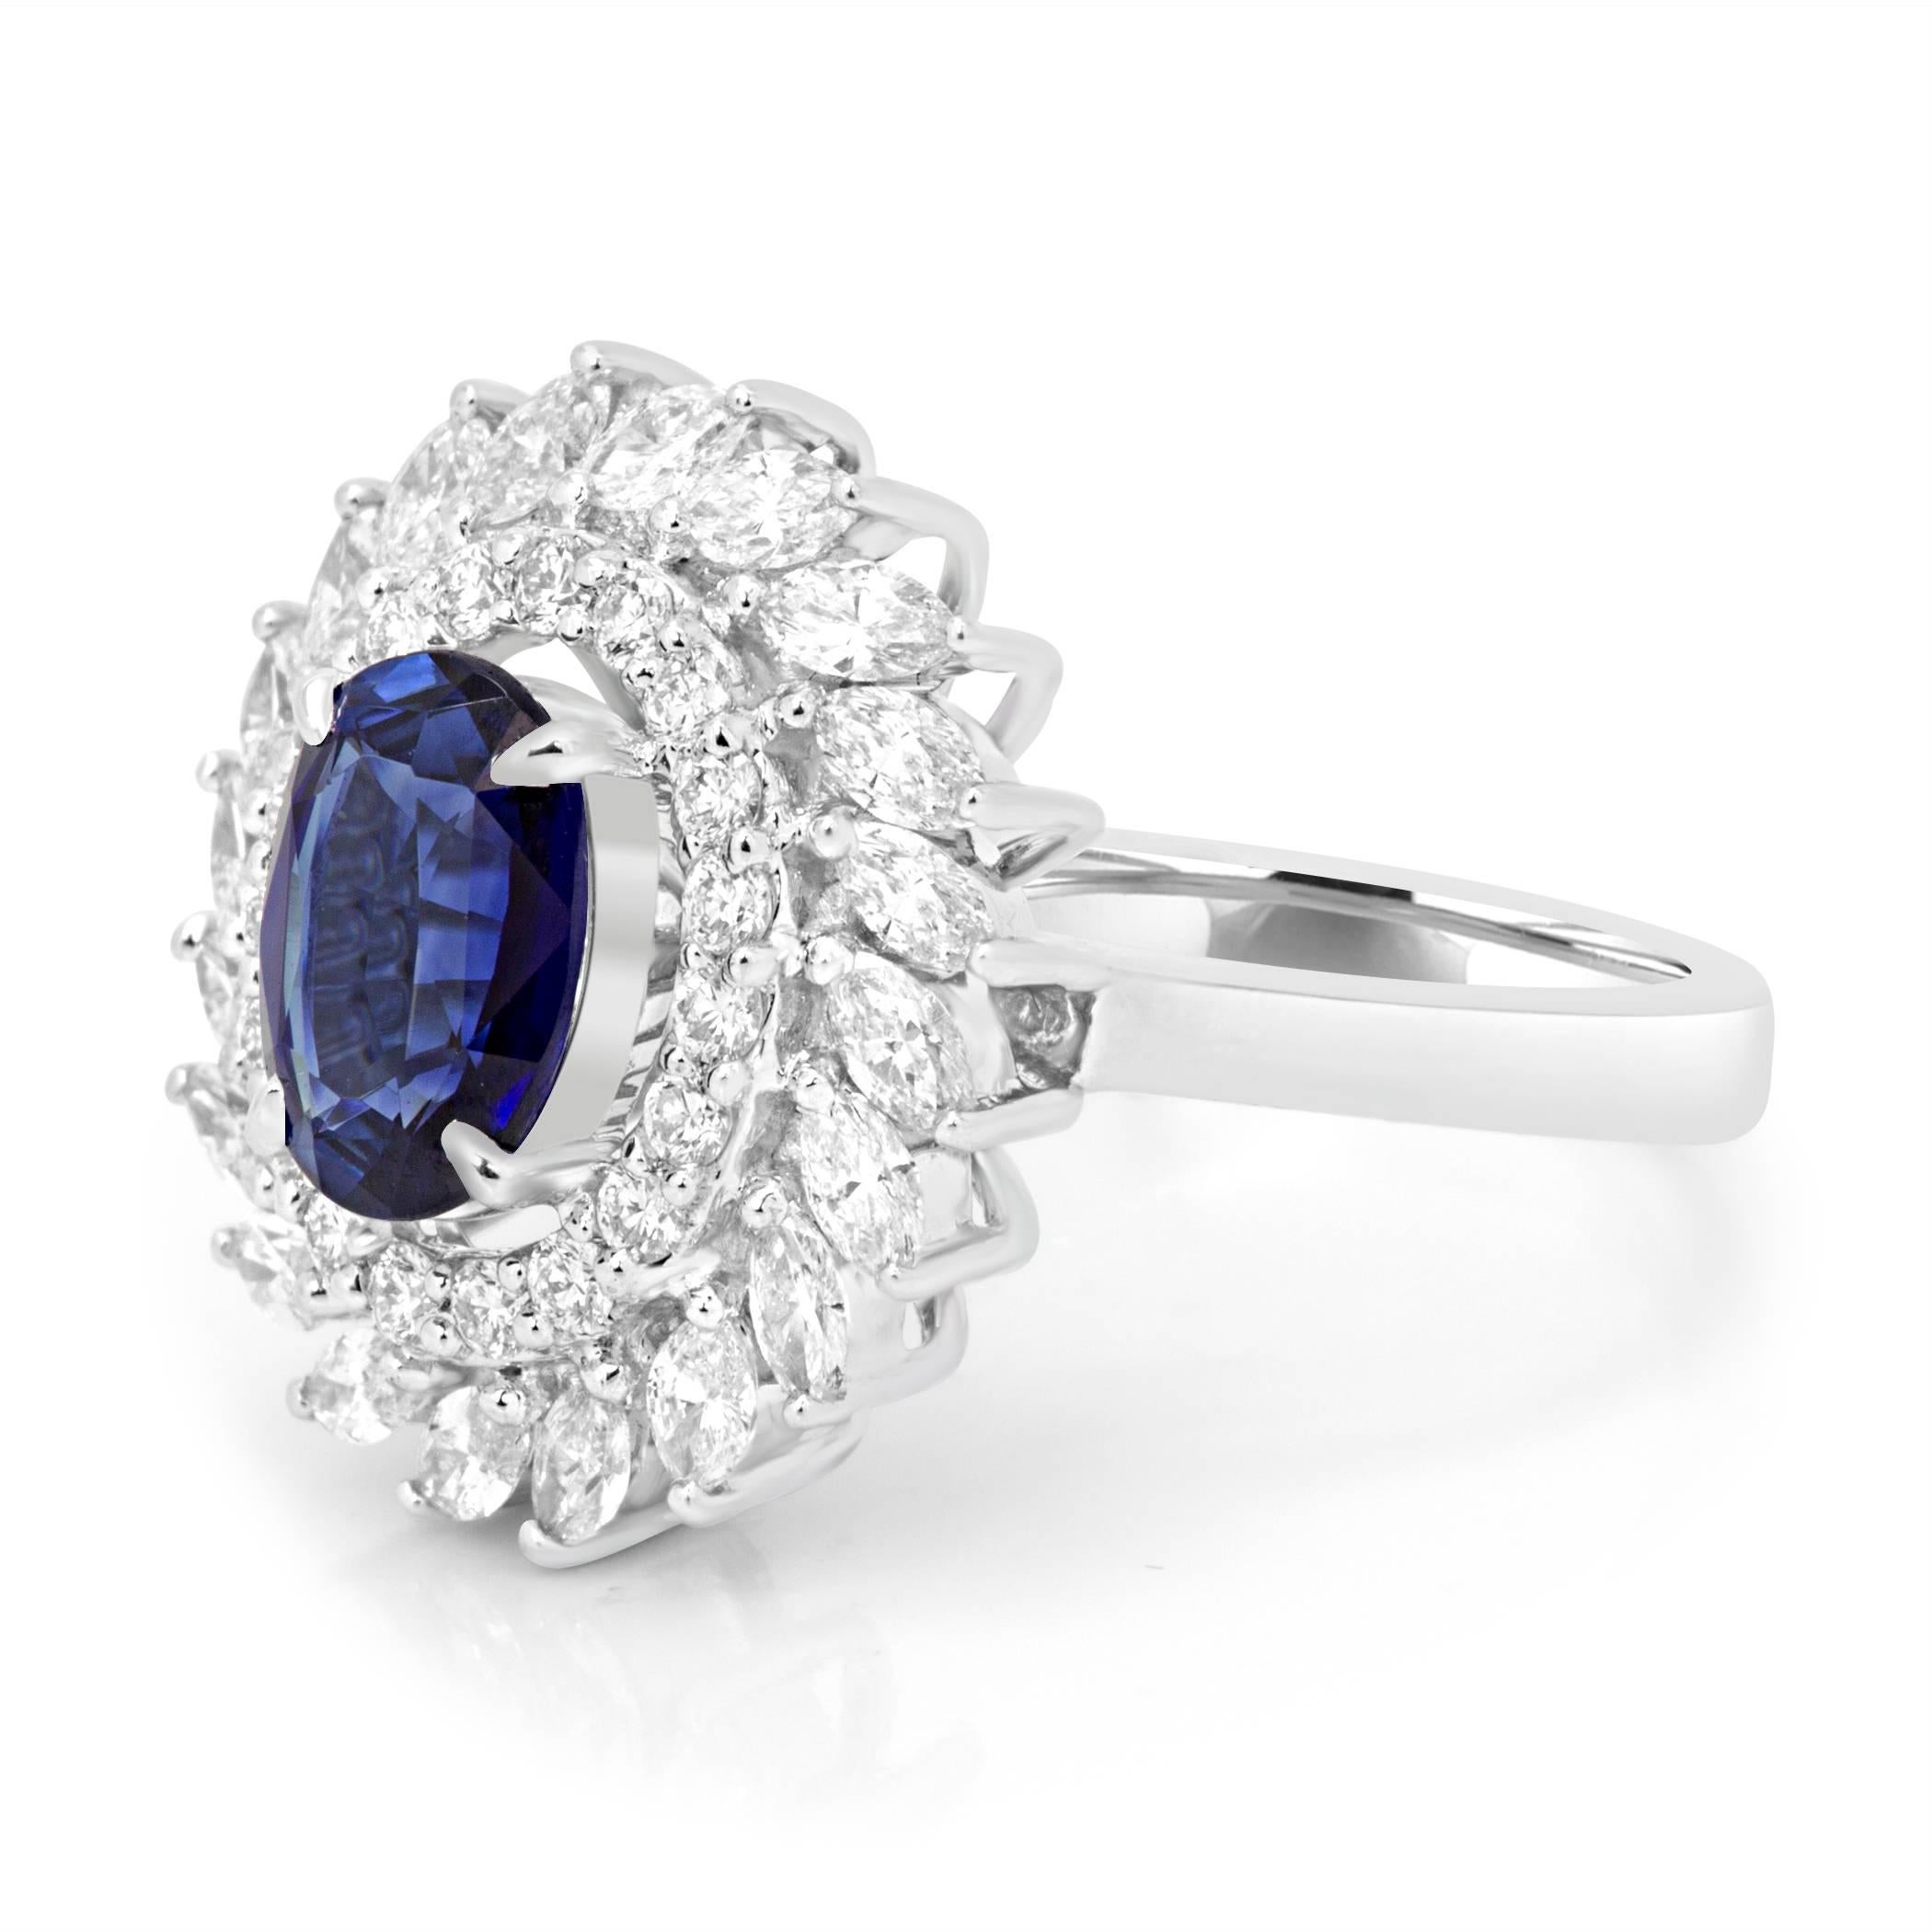 GIA Certified Stunning Blue Sapphire 1.50 Carat Encircled in a Halo of White Diamond Rounds VS Quality and White Diamond Marquise VS Quality  1.10 Carat in 14K White Gold Stylish Fashion Cocktail Ring.

Style available in different price ranges.